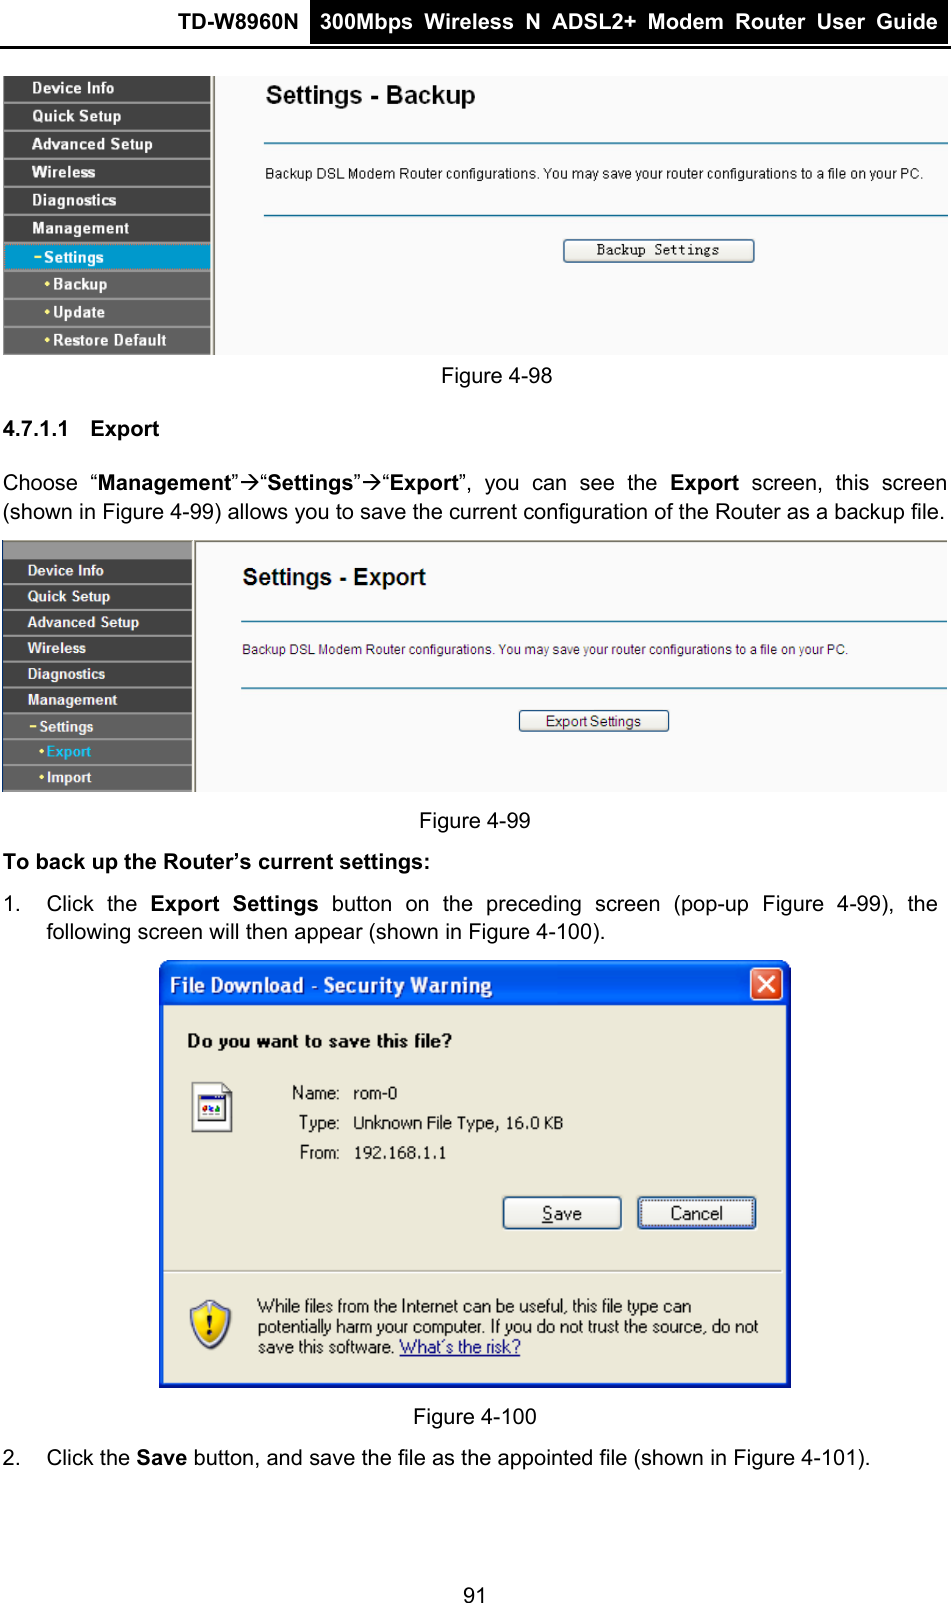 TD-W8960N  300Mbps Wireless N ADSL2+ Modem Router User Guide   Figure 4-98 4.7.1.1  Export Choose “Management”Æ“Settings”Æ“Export”, you can see the Export screen, this screen (shown in Figure 4-99) allows you to save the current configuration of the Router as a backup file.  Figure 4-99 To back up the Router’s current settings: 1. Click the Export Settings button on the preceding screen (pop-up Figure 4-99), the following screen will then appear (shown in Figure 4-100).  Figure 4-100 2. Click the Save button, and save the file as the appointed file (shown in Figure 4-101). 91 